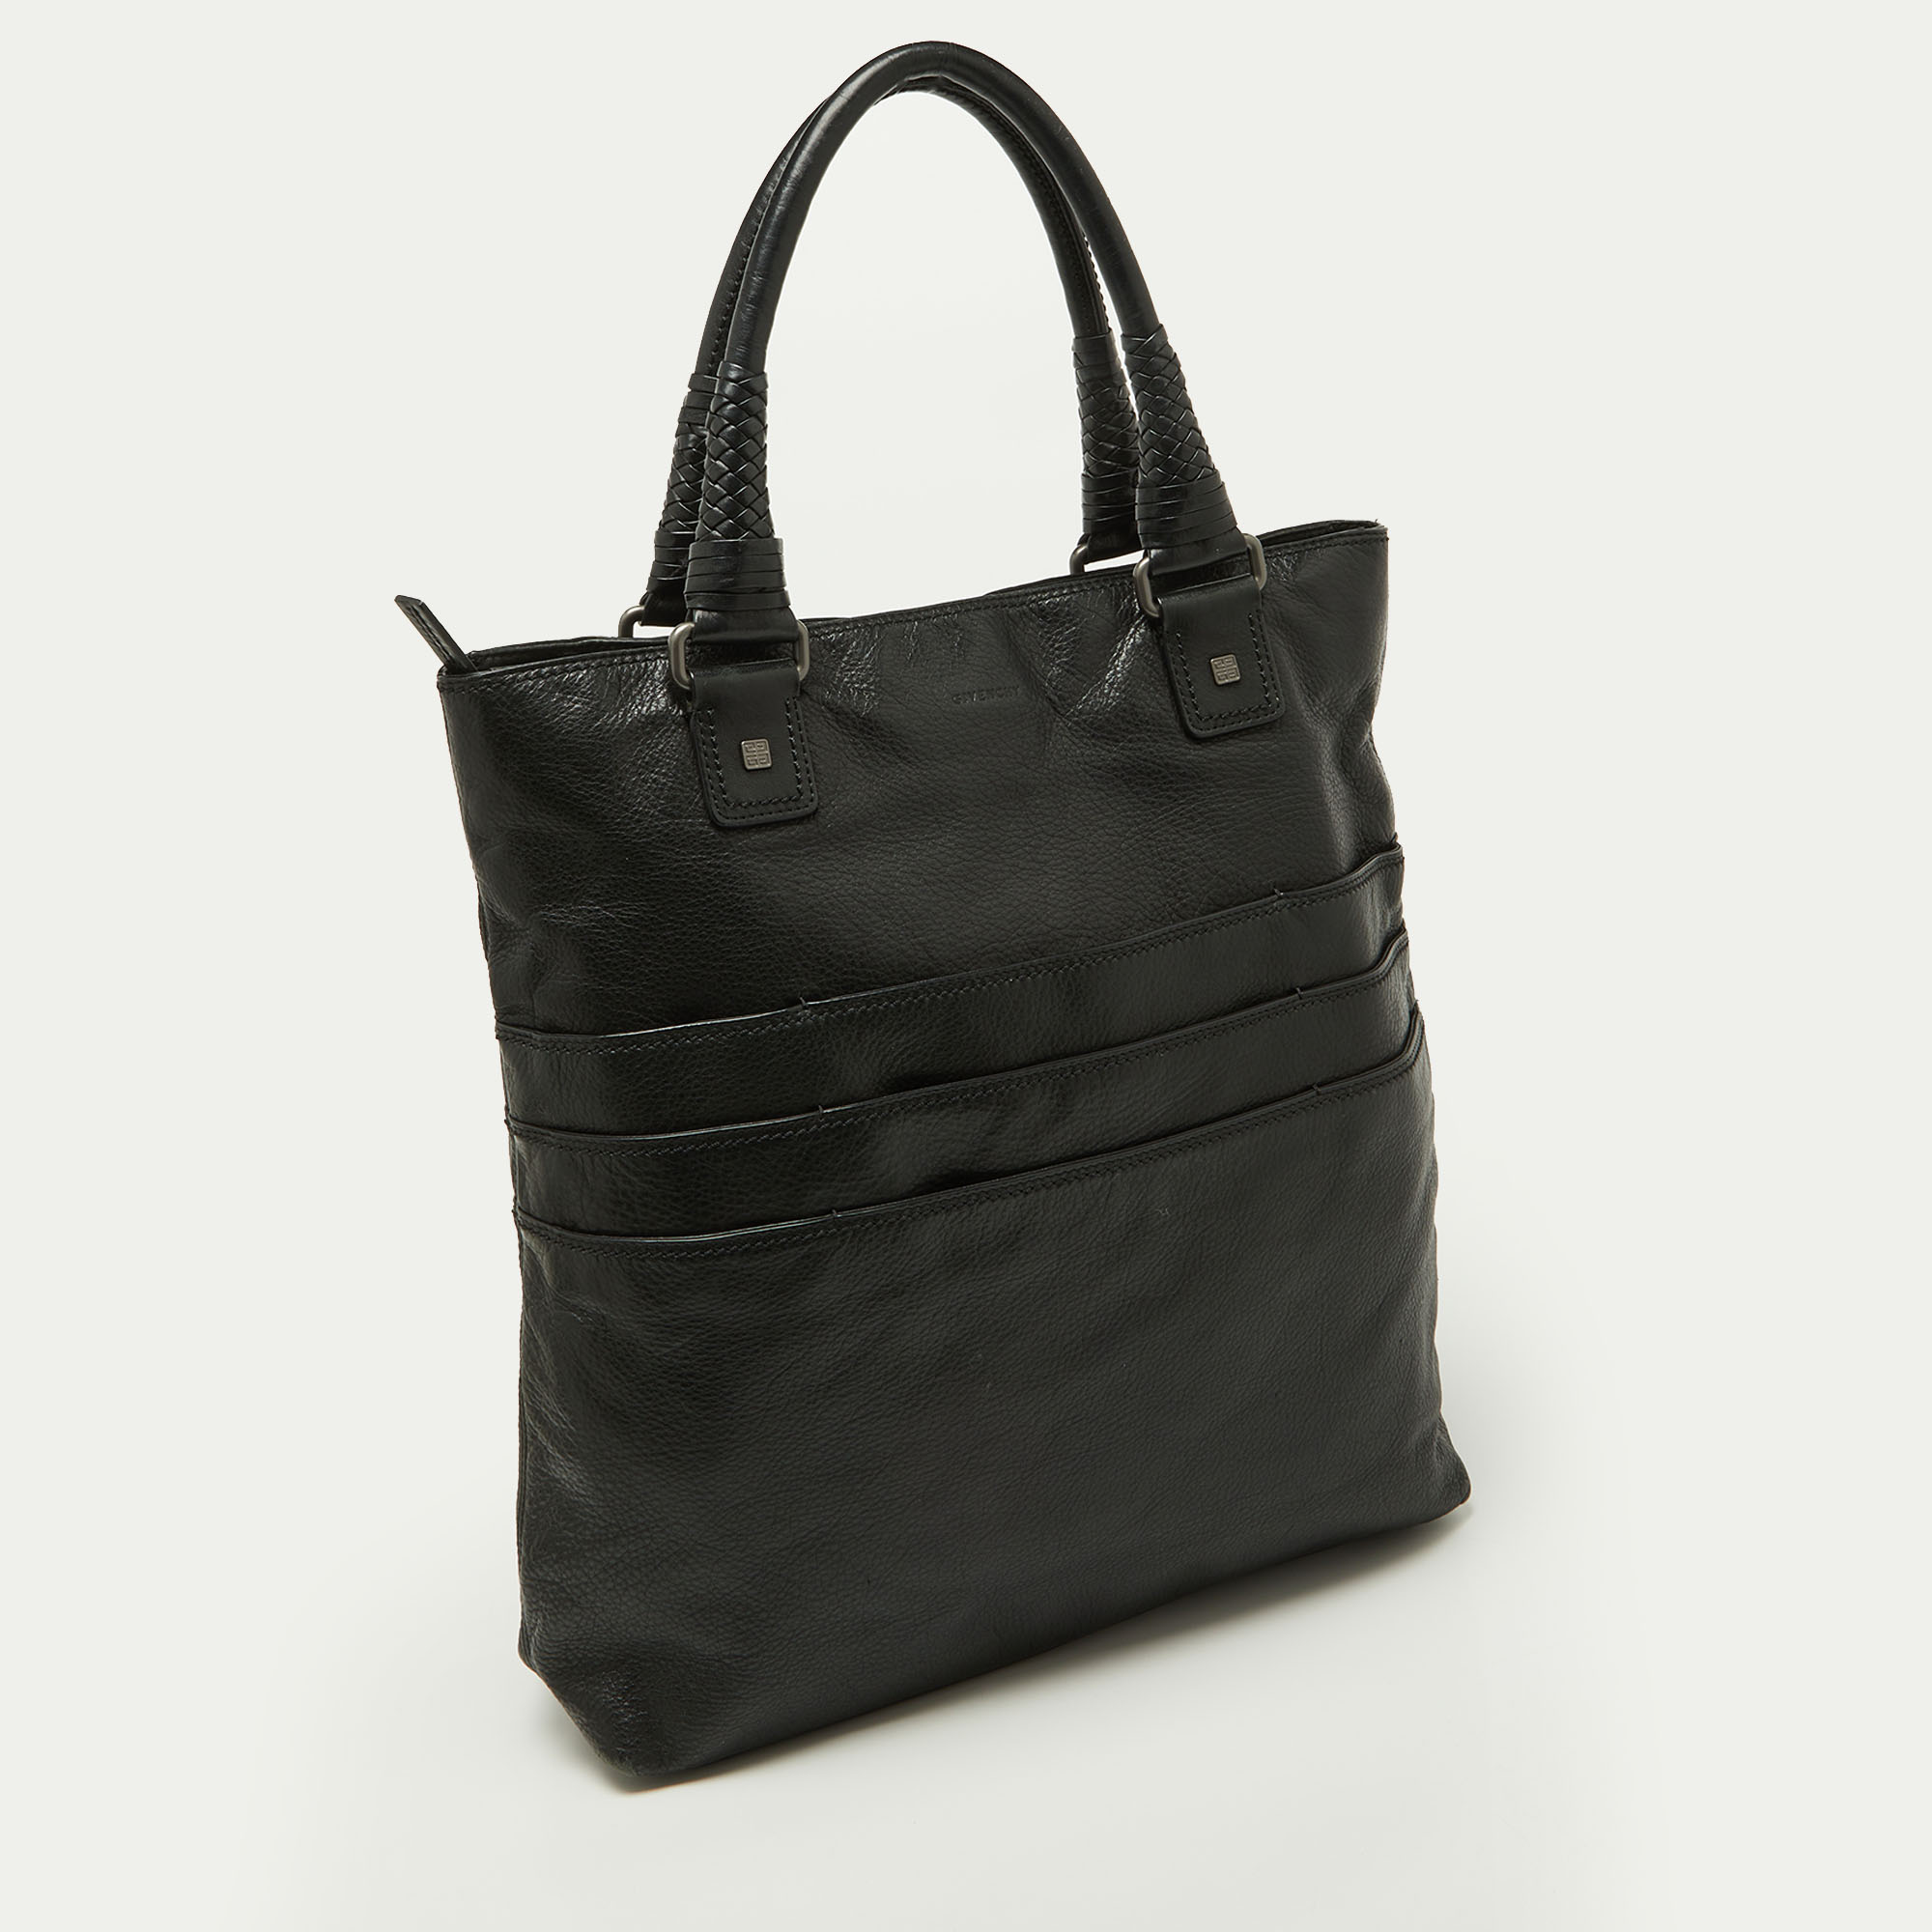 Givenchy Black Leather Shopper Tote